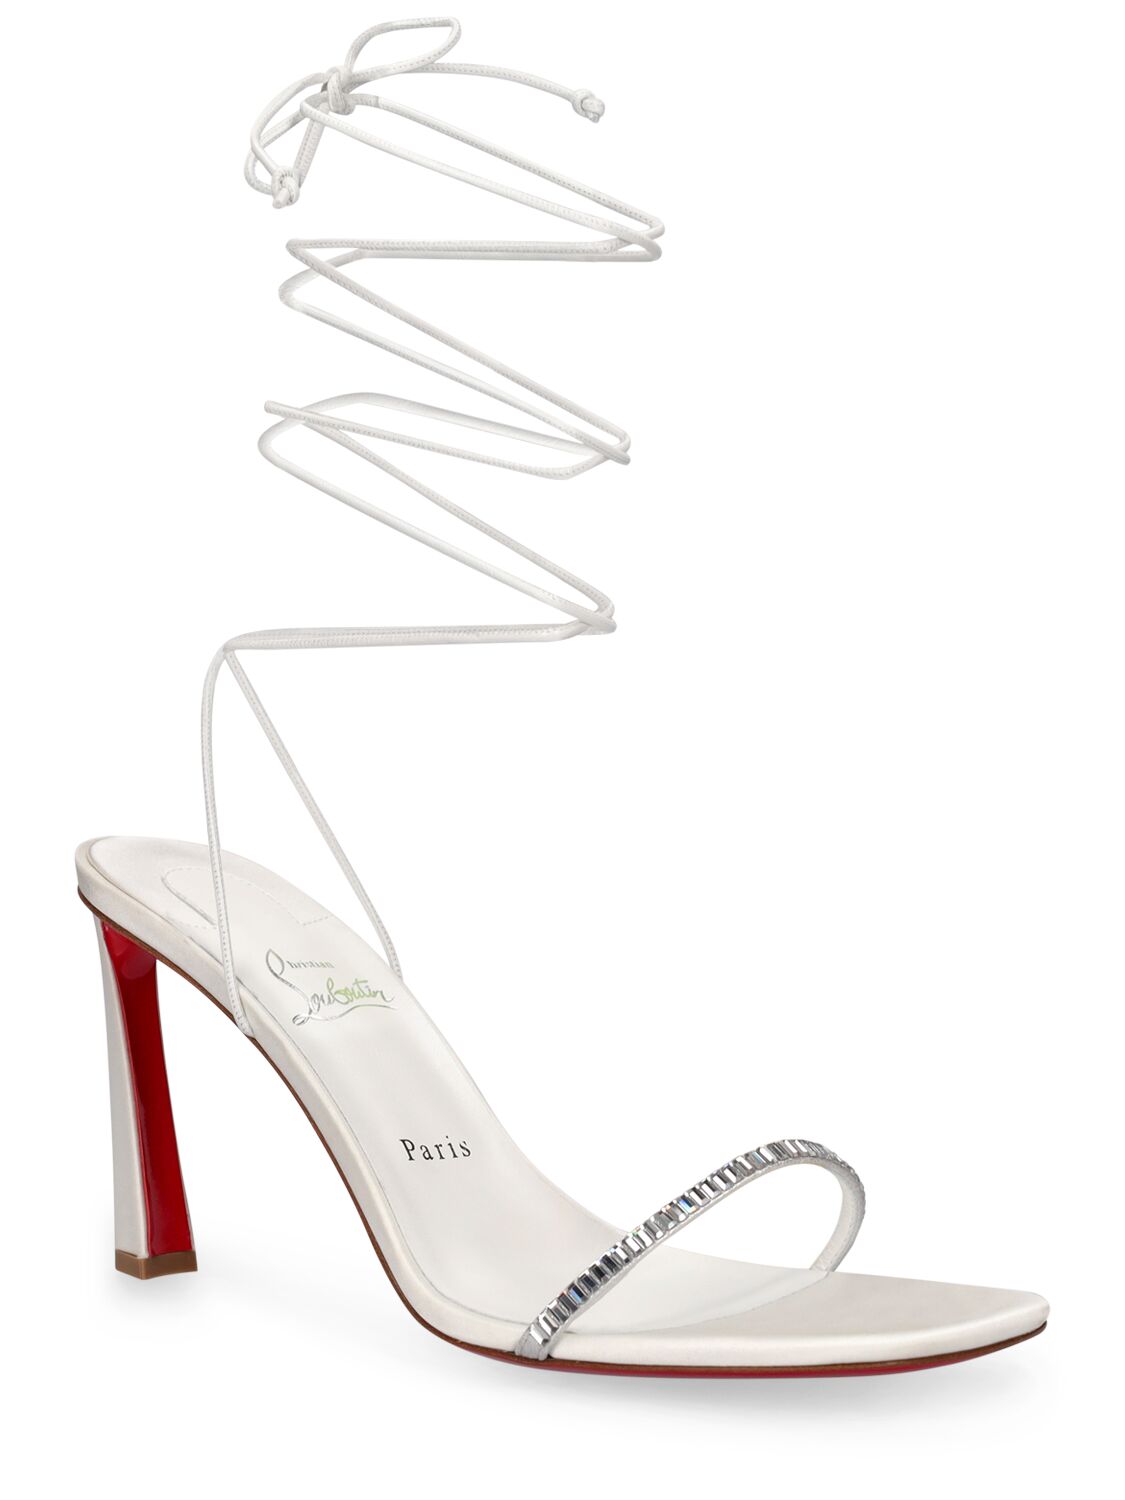 Shop Christian Louboutin 85mm Condora Satin Sandals In Ivory